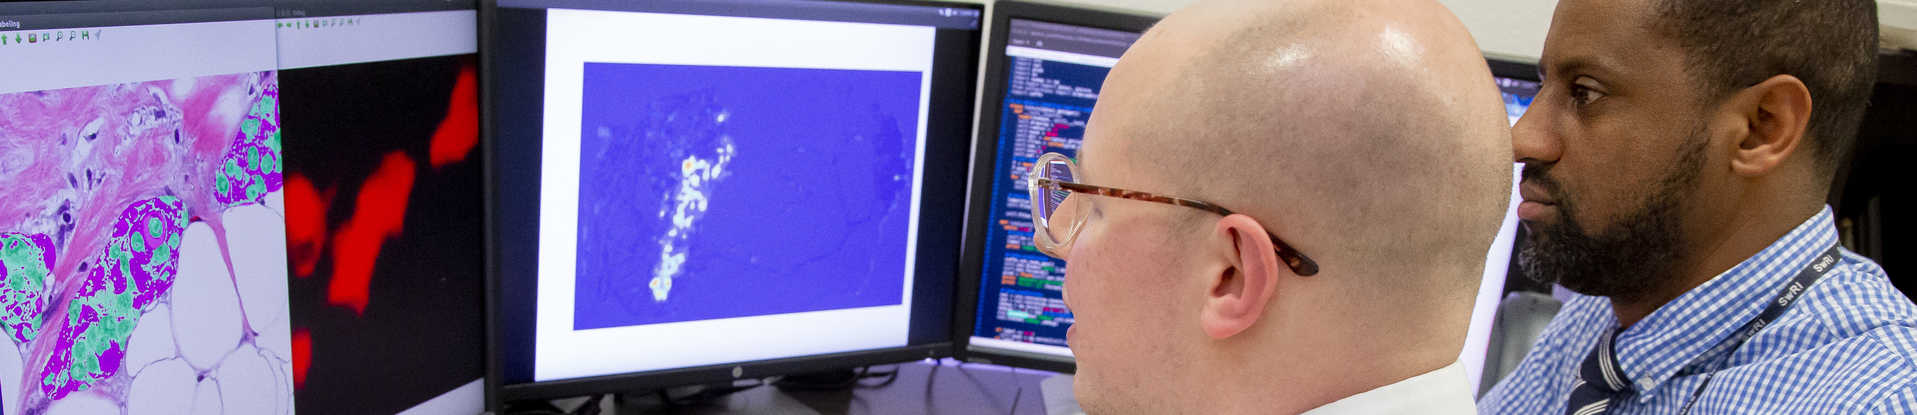 SwRI engineers David Chambers and Donald Poole analyze breast cancer tumor cells